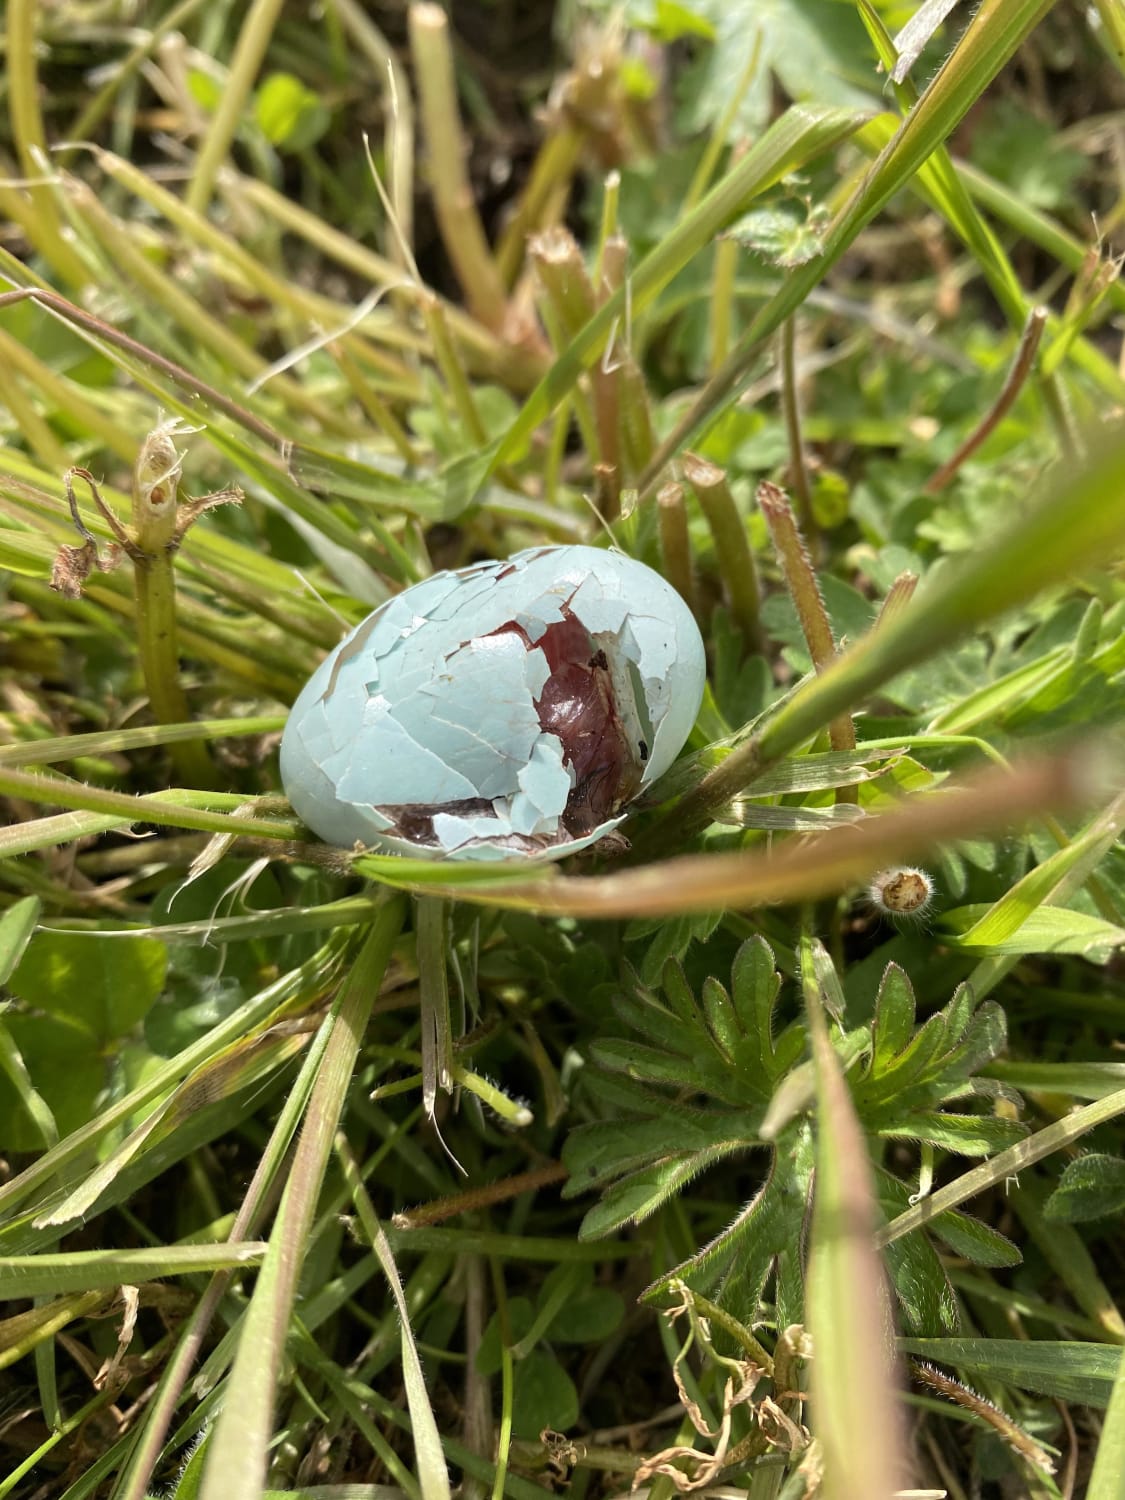 A literal Easter egg hunt. I found this Robin(?) egg in the grass this morning. There were no trees in the immediate area it could’ve fallen out of. I’m guessing one of the neighborhood crows got ahold of it.